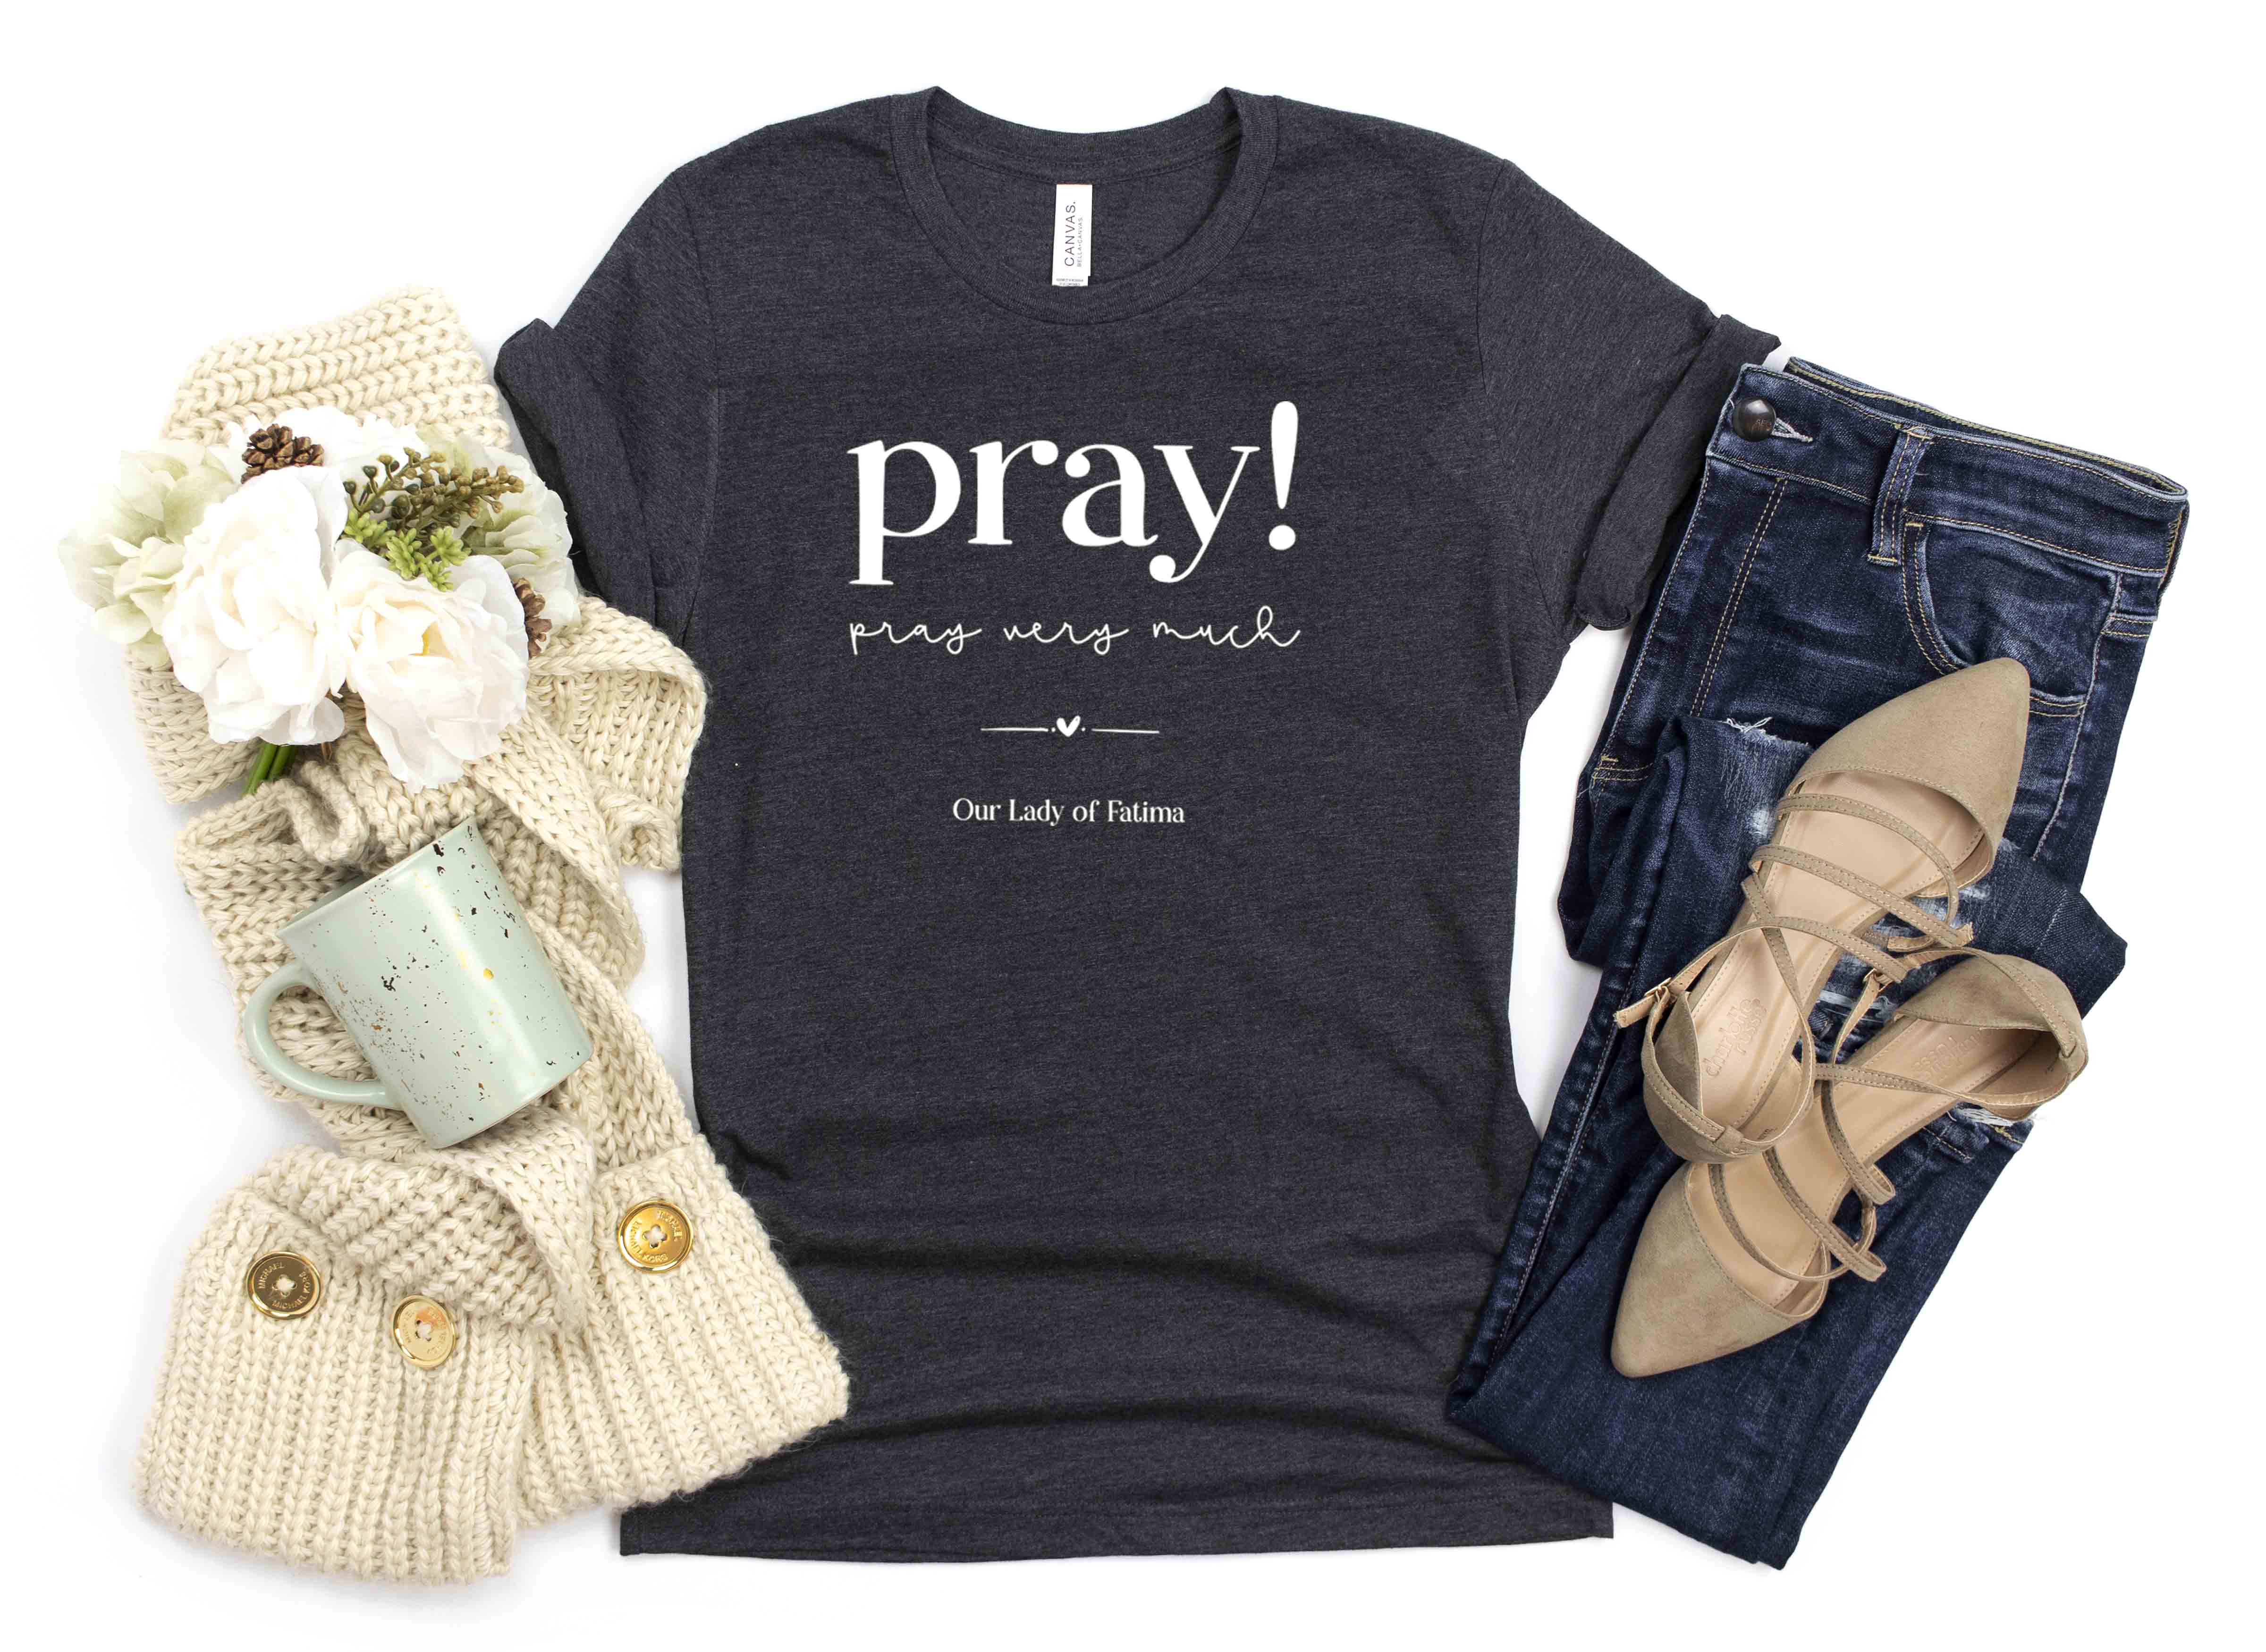 Our Lady of Fatima, Pray Very Much T-Shirt